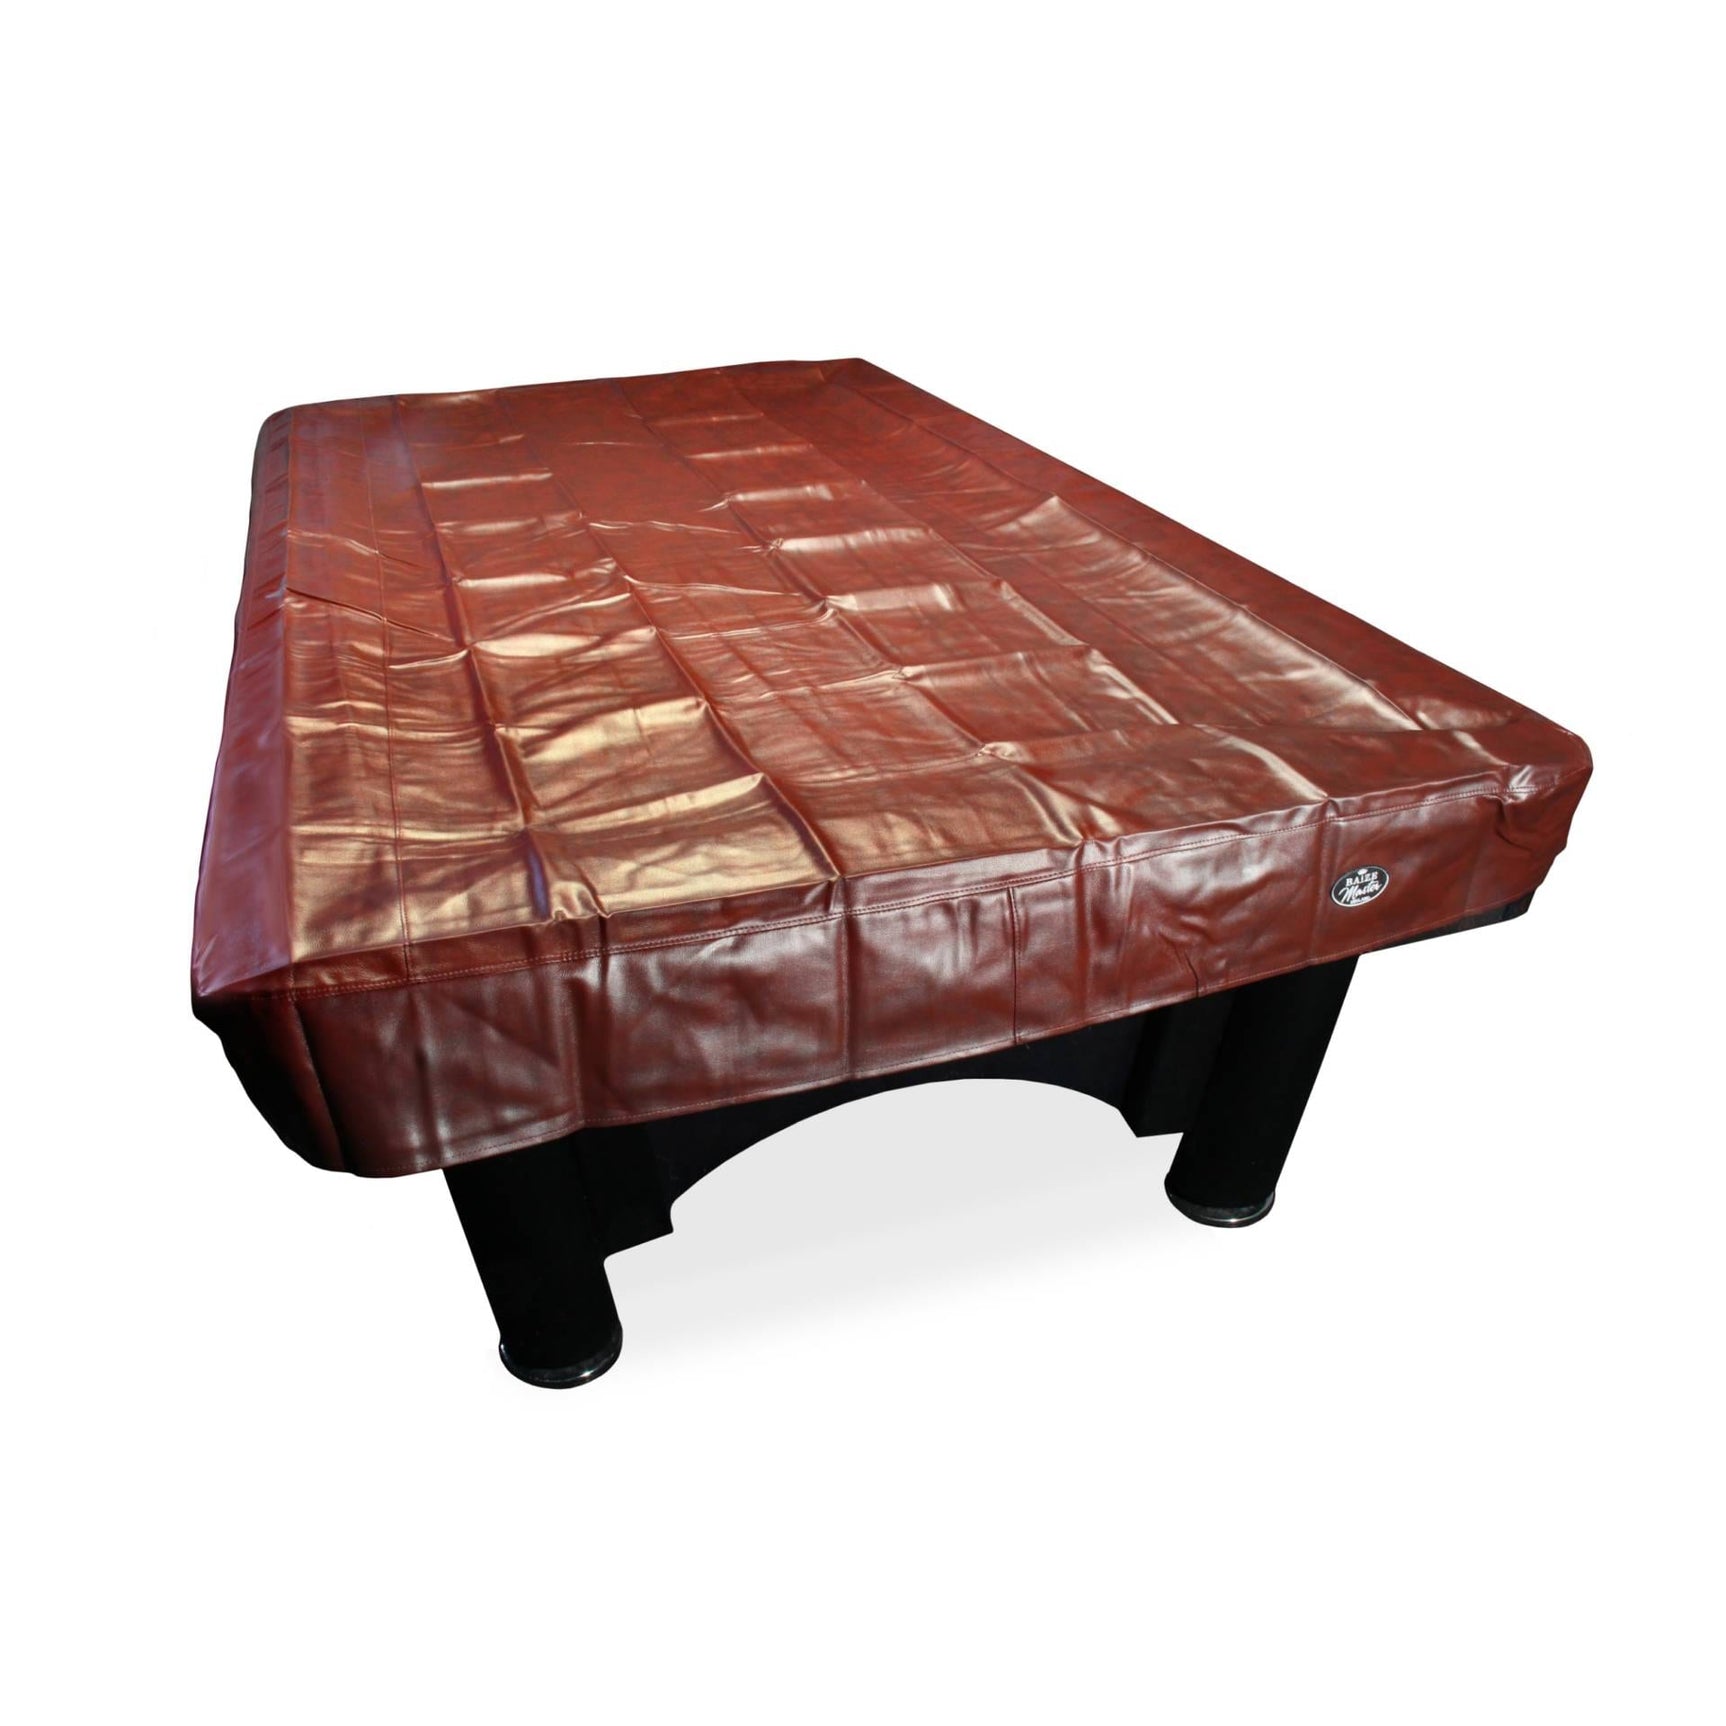 Baize Master Heavy Duty Water Resistant American Pool Table Cover - 9FT BURGUNDY